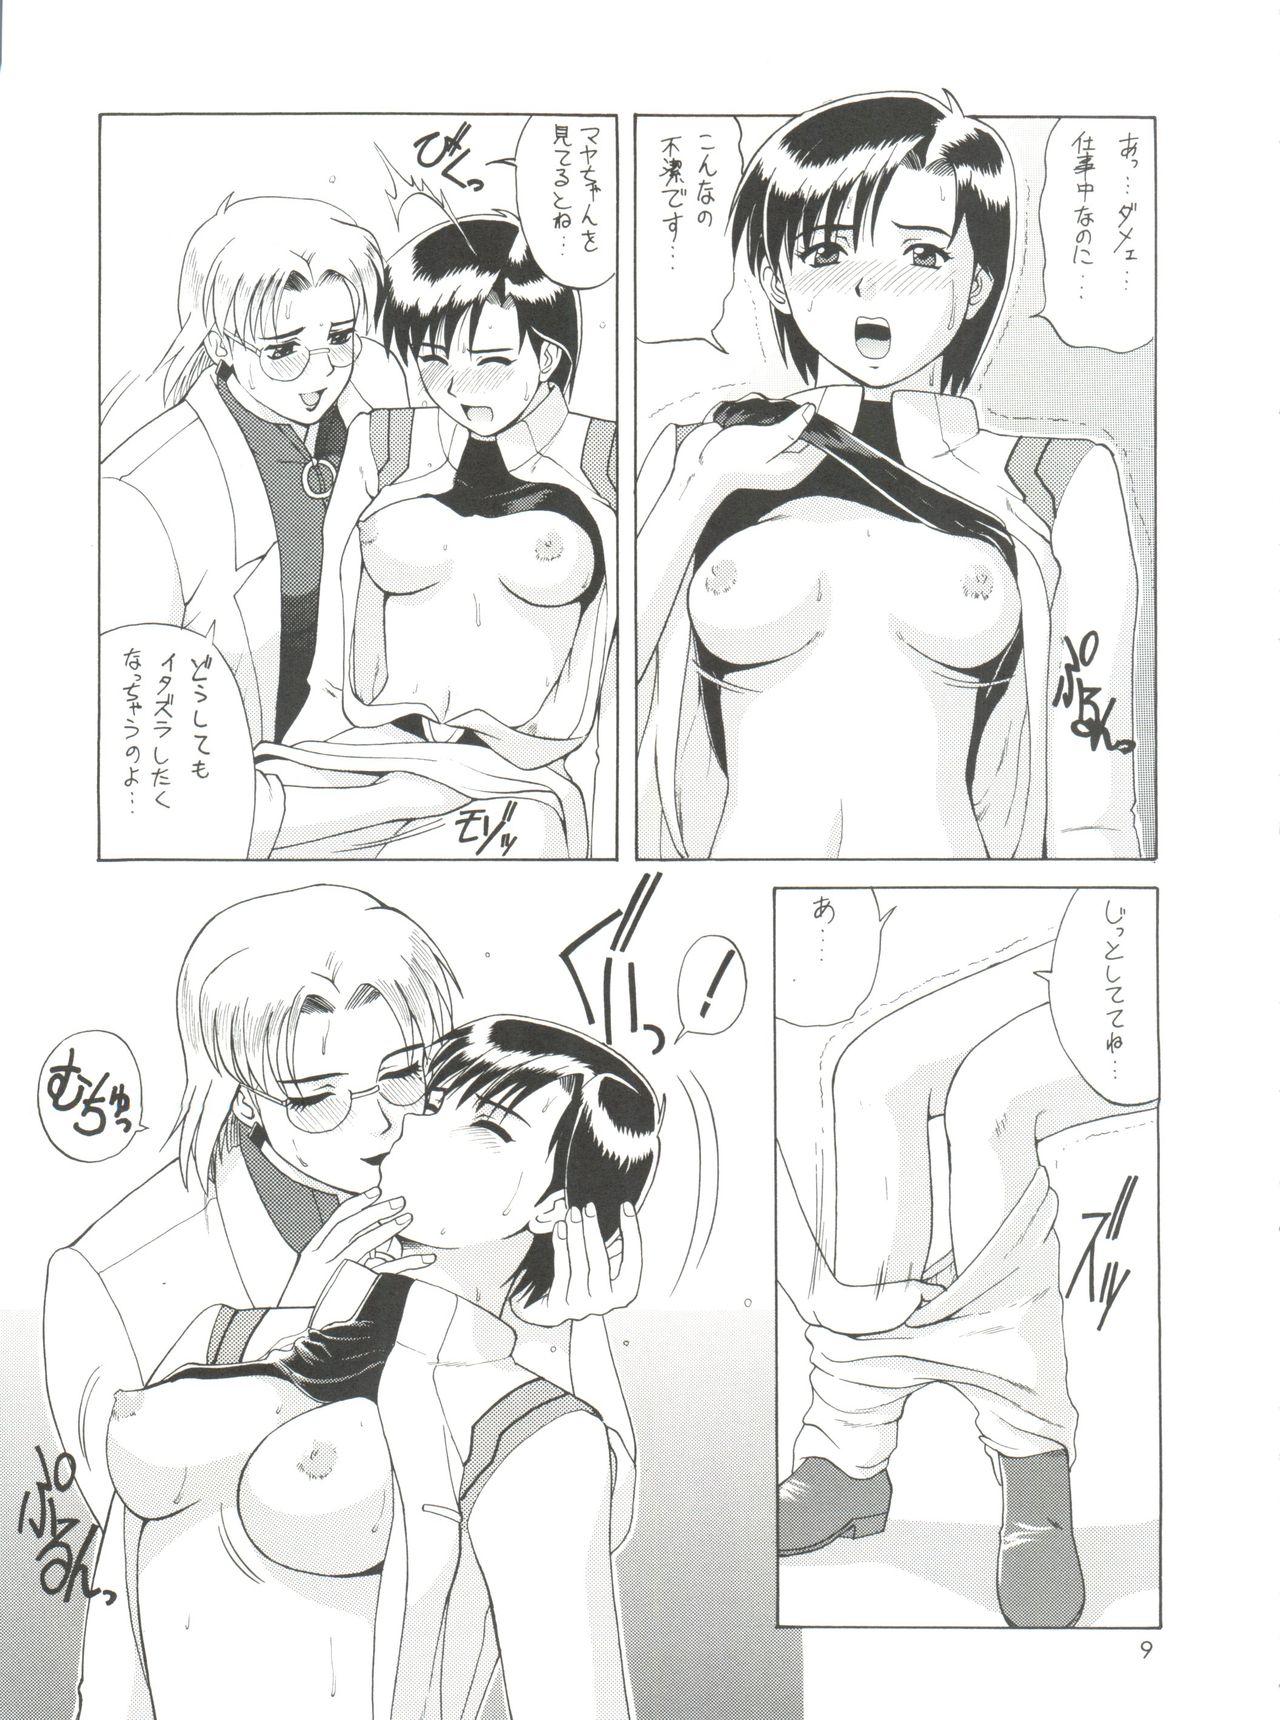 Blondes Suite For My Sweet Shinteiban - Neon genesis evangelion Awesome - Page 8